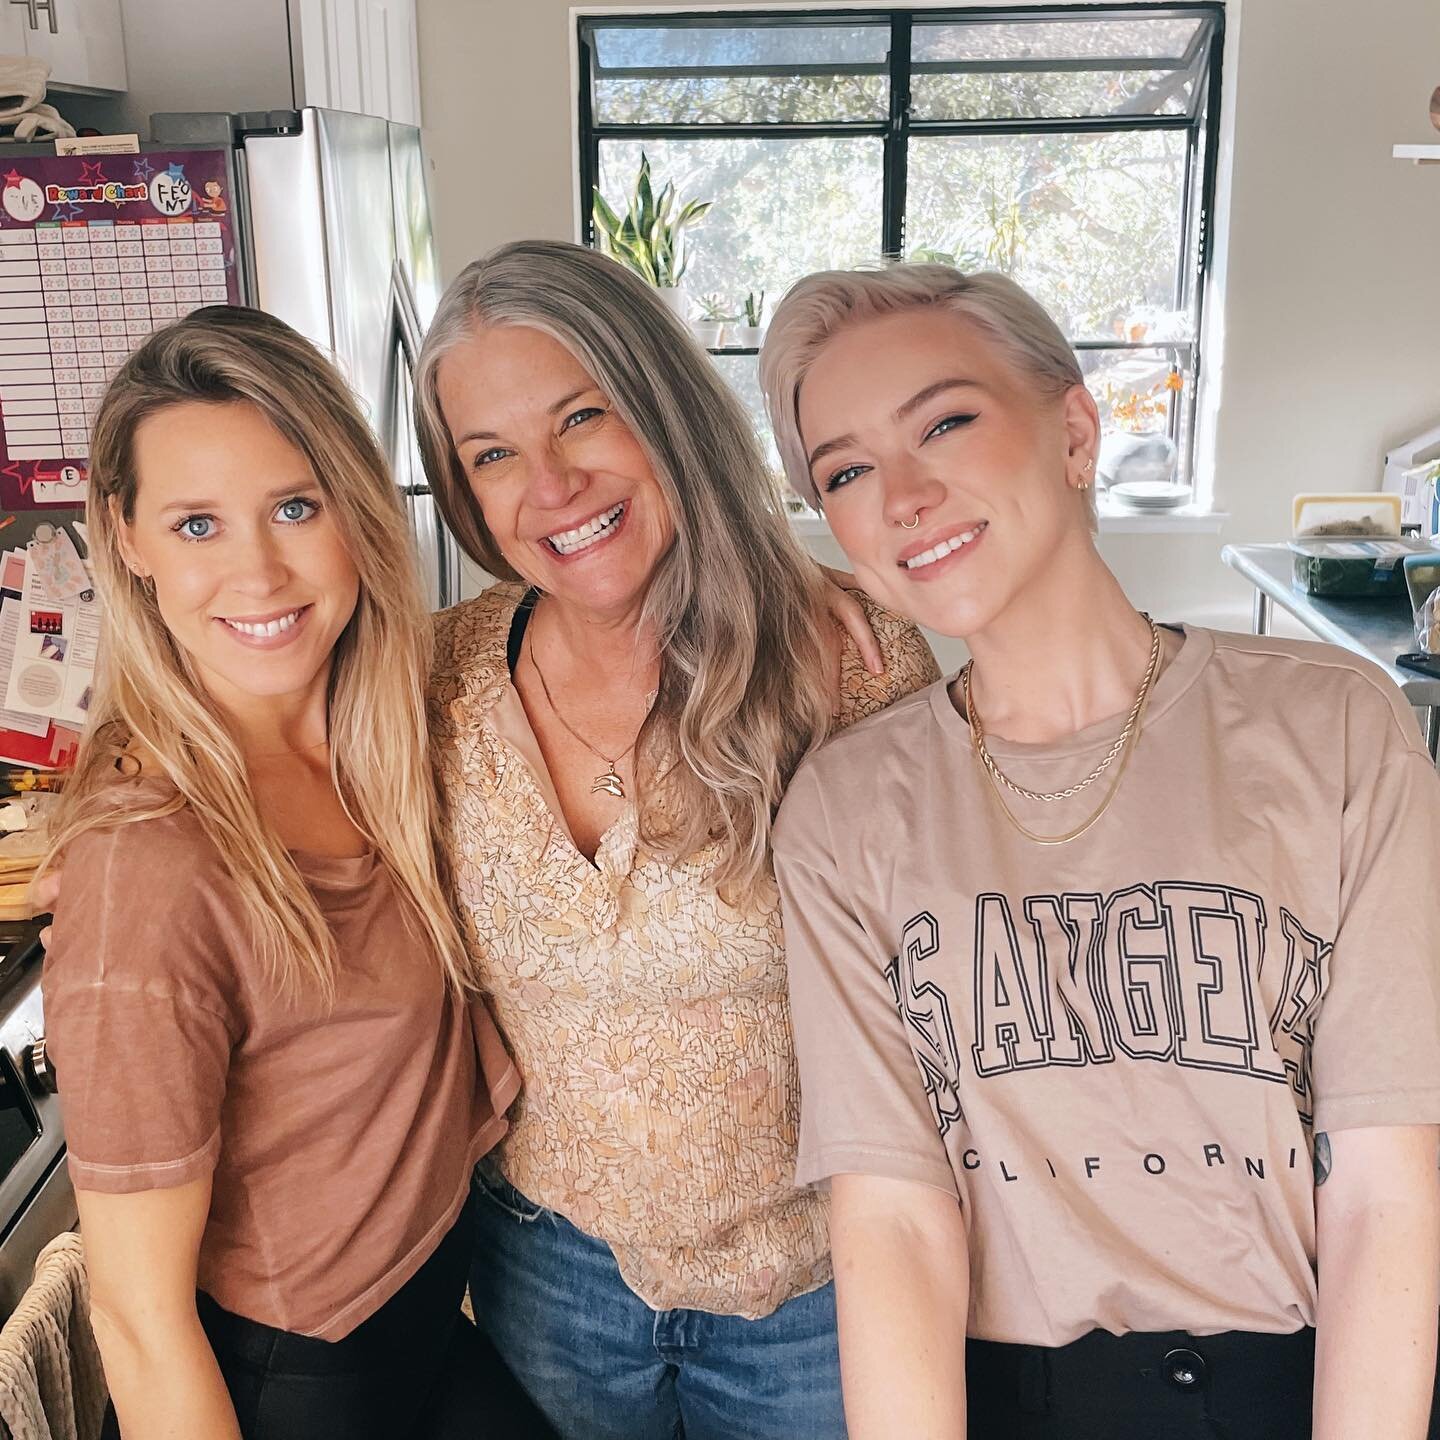 taking the meaning of &ldquo;let&rsquo;s doula this&rdquo; to a whole notha level this Turkey day 💗 very grateful to have these two beautiful people in my life as doulas but also as my family 🥰 I love you both so much! also what are the chances tha